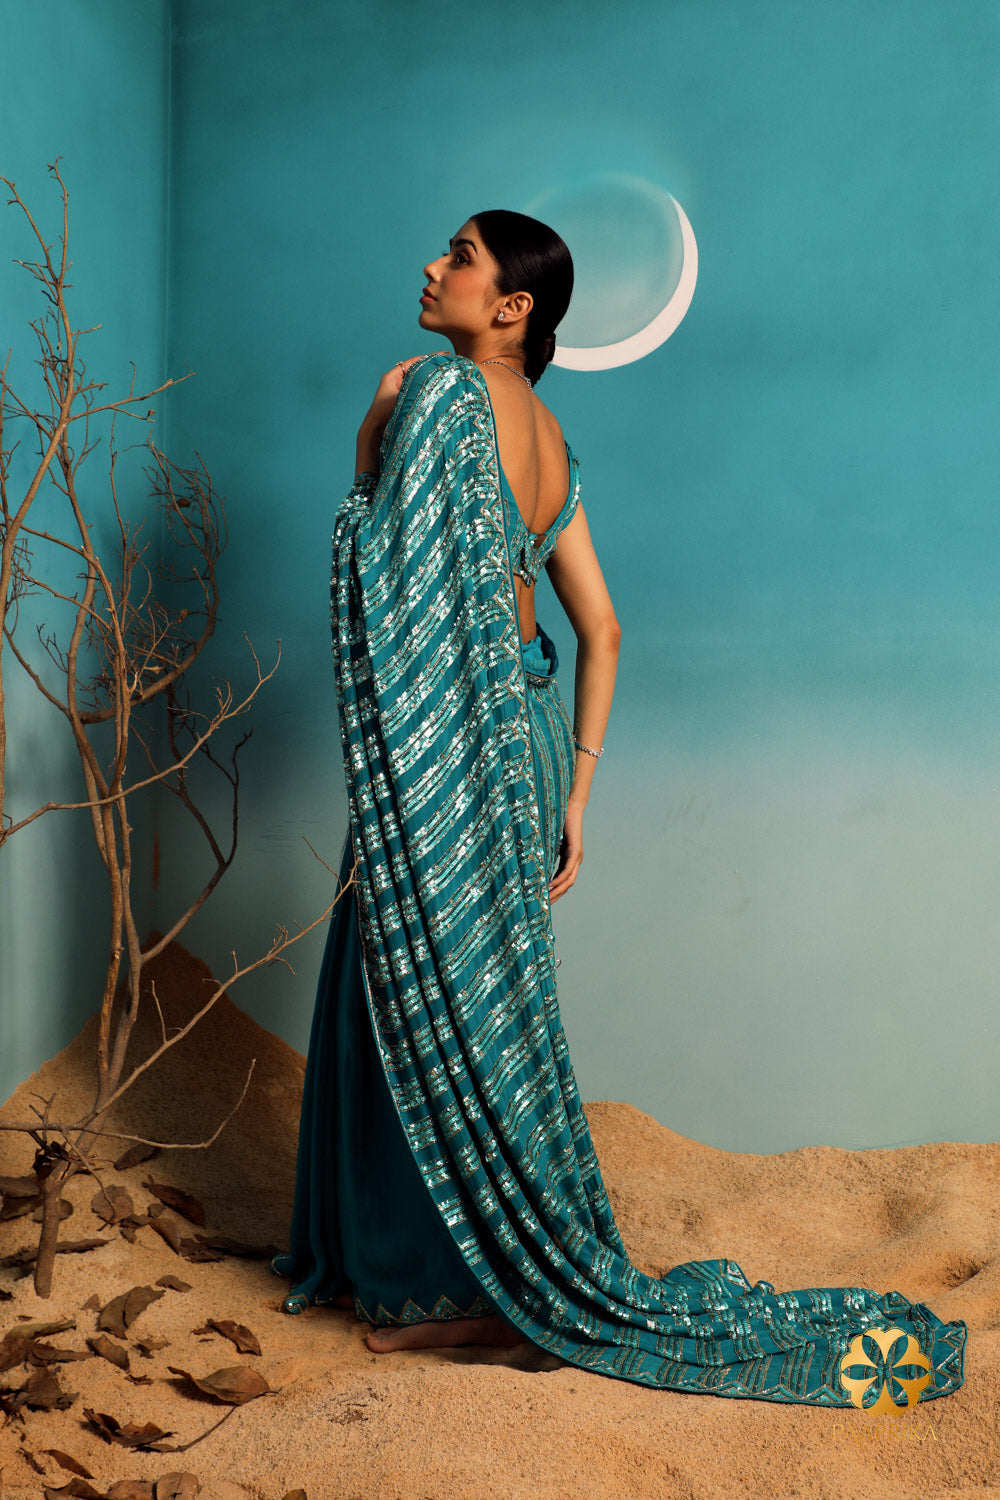 Elegant teal pure georgette saree featuring intricate triangular pattern embroidery using sequins and cut dana.